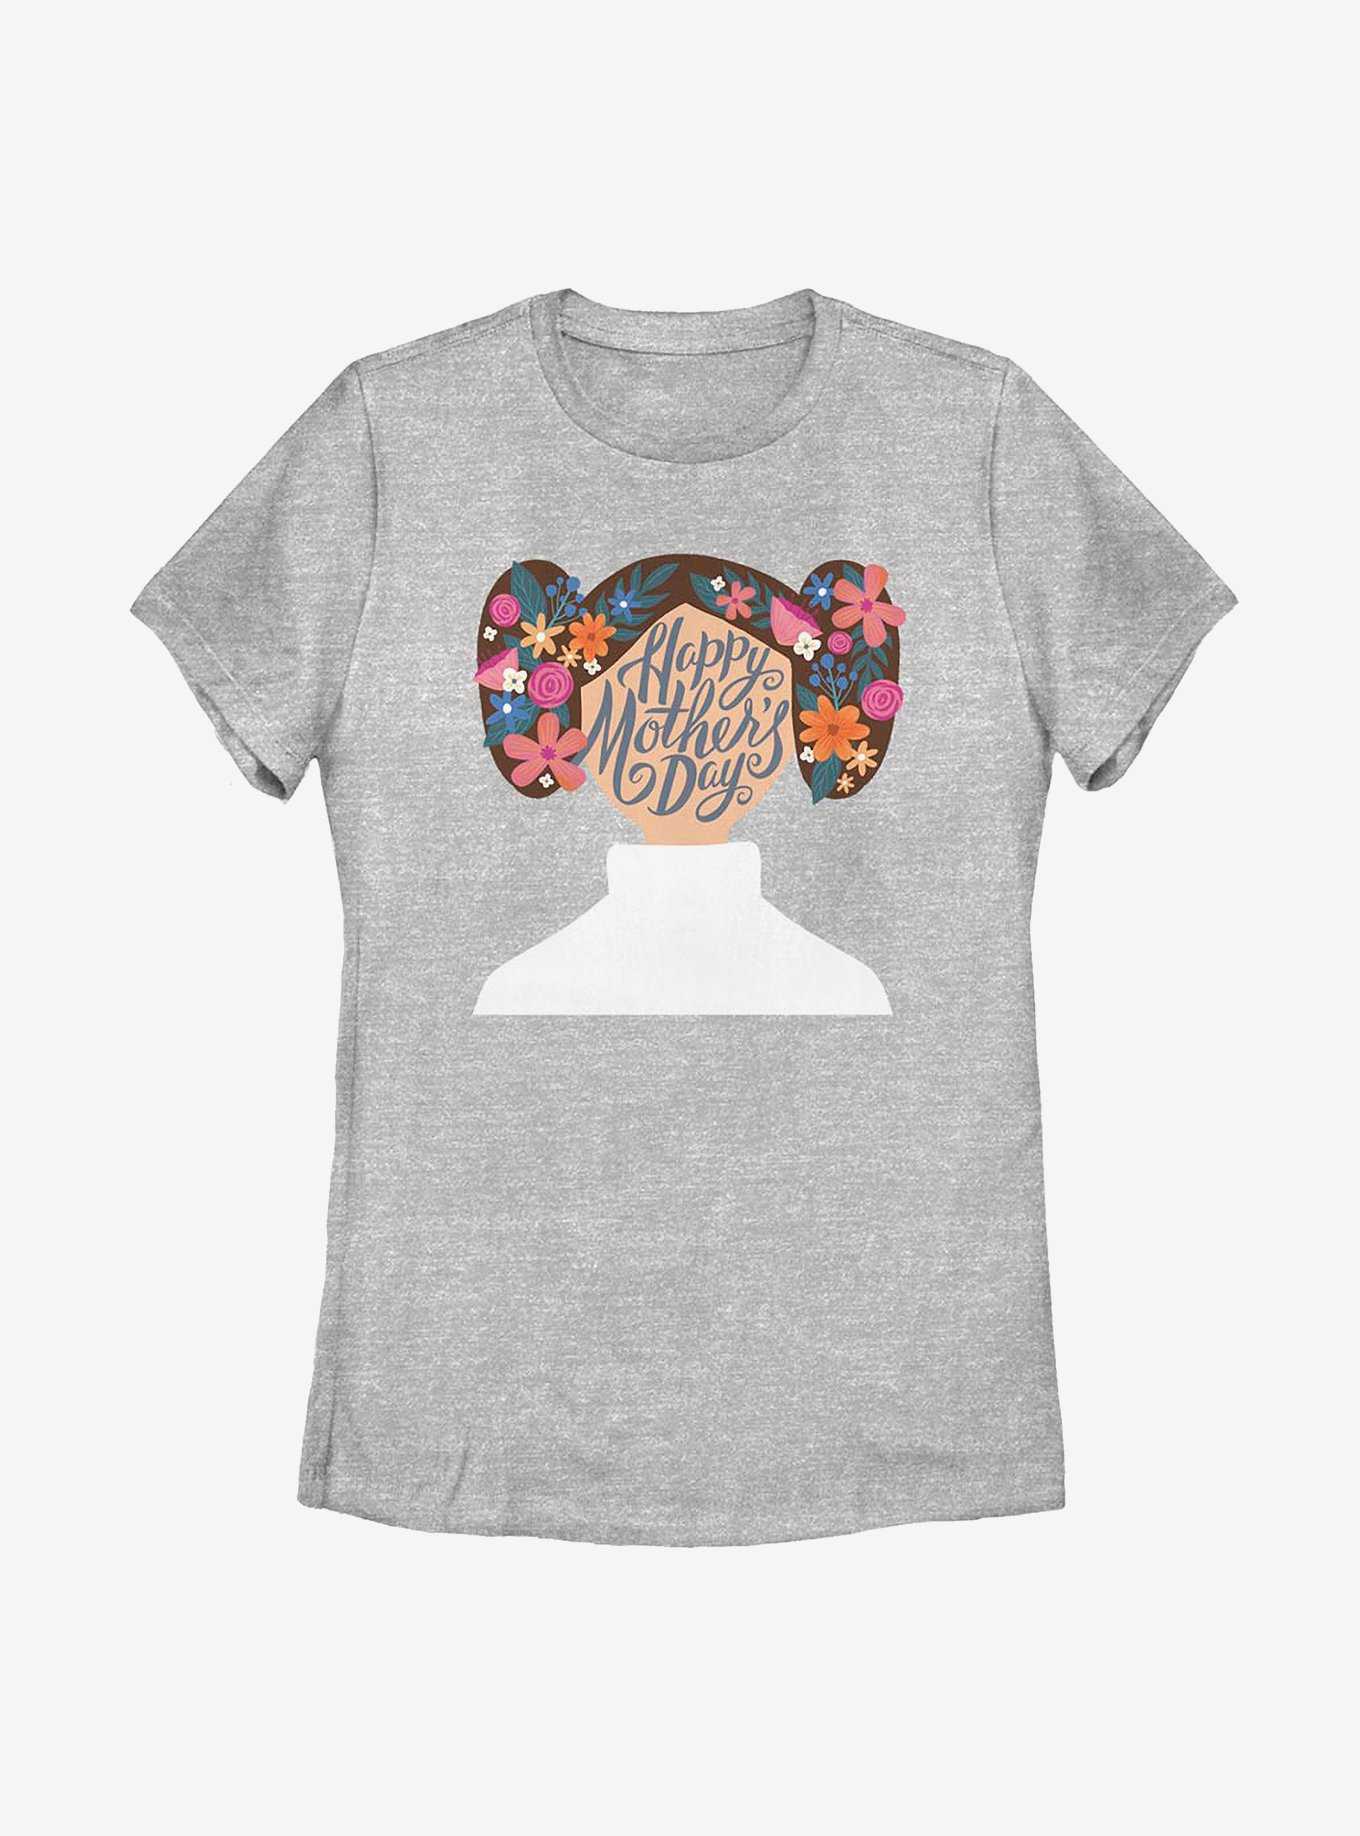 Star Wars Leia Mother's Day Womens T-Shirt, , hi-res